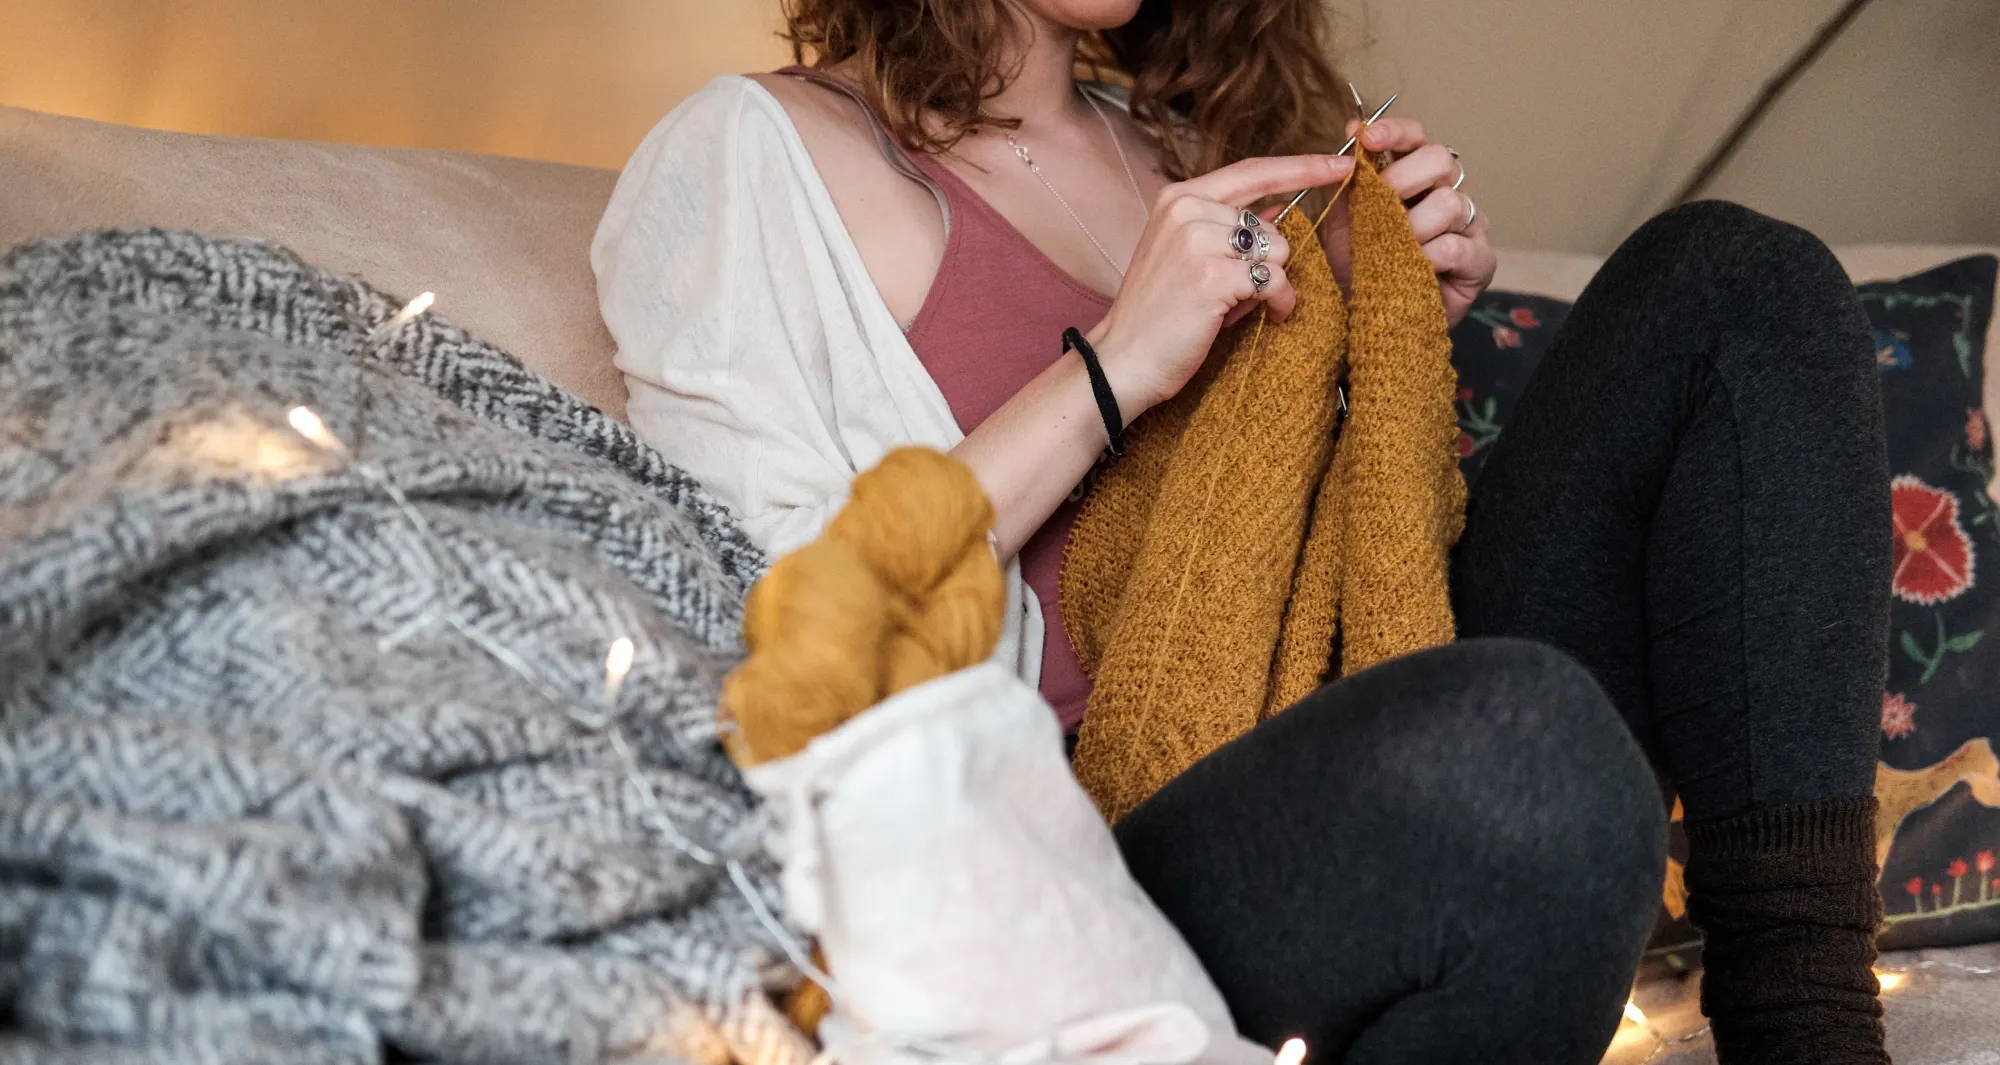 Woman knitting with hemp yarn on a couch.